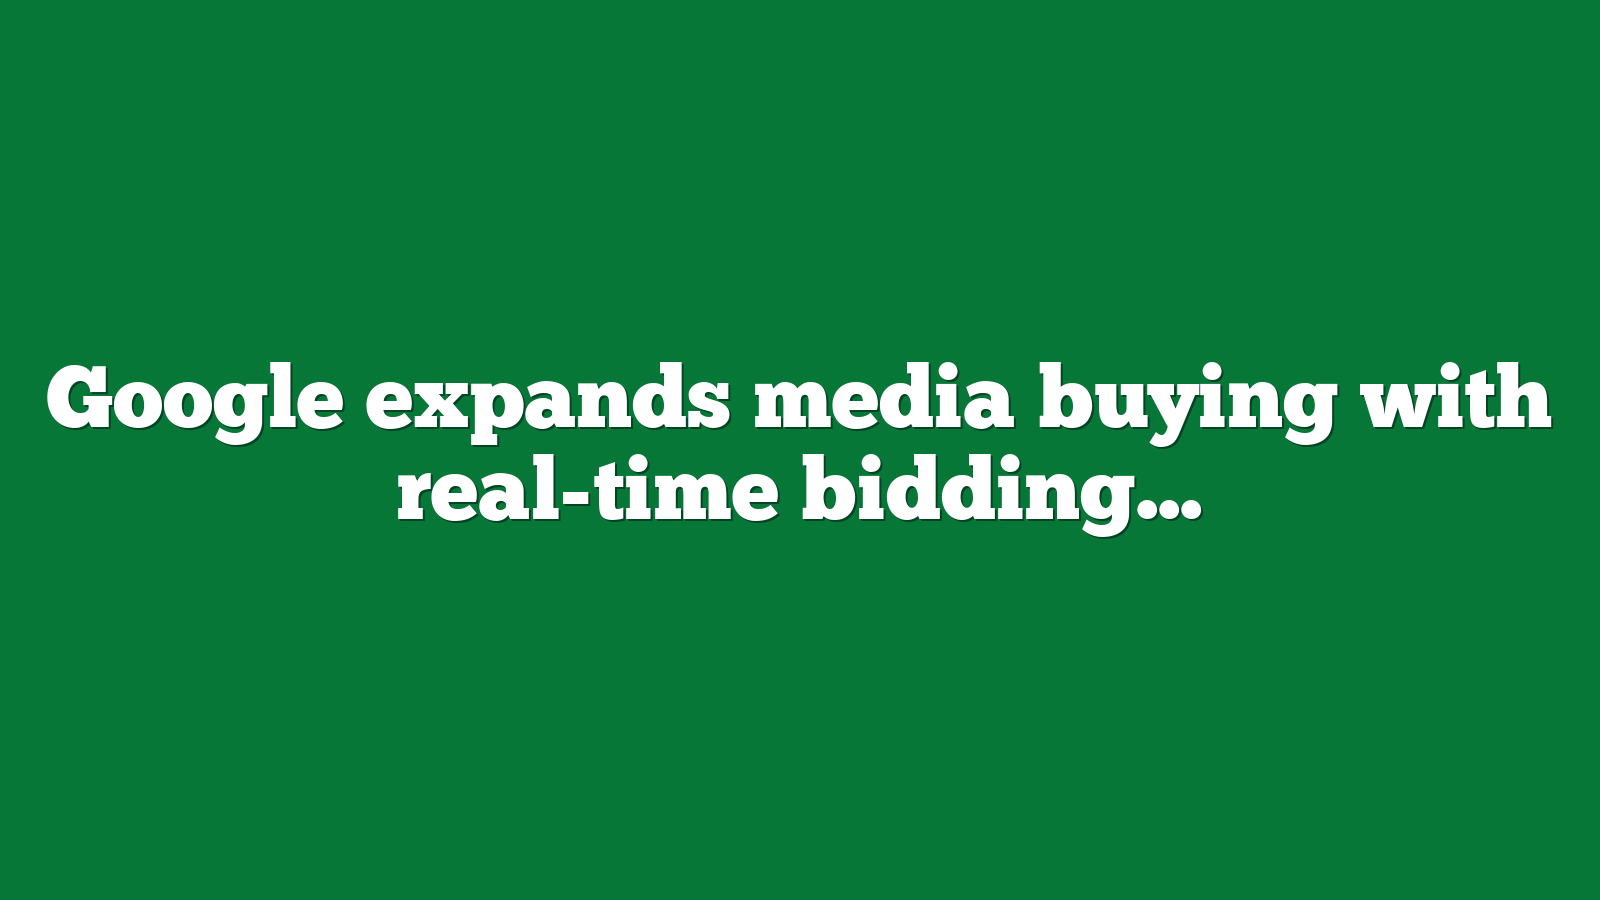 Google expands media buying with real-time bidding integrations